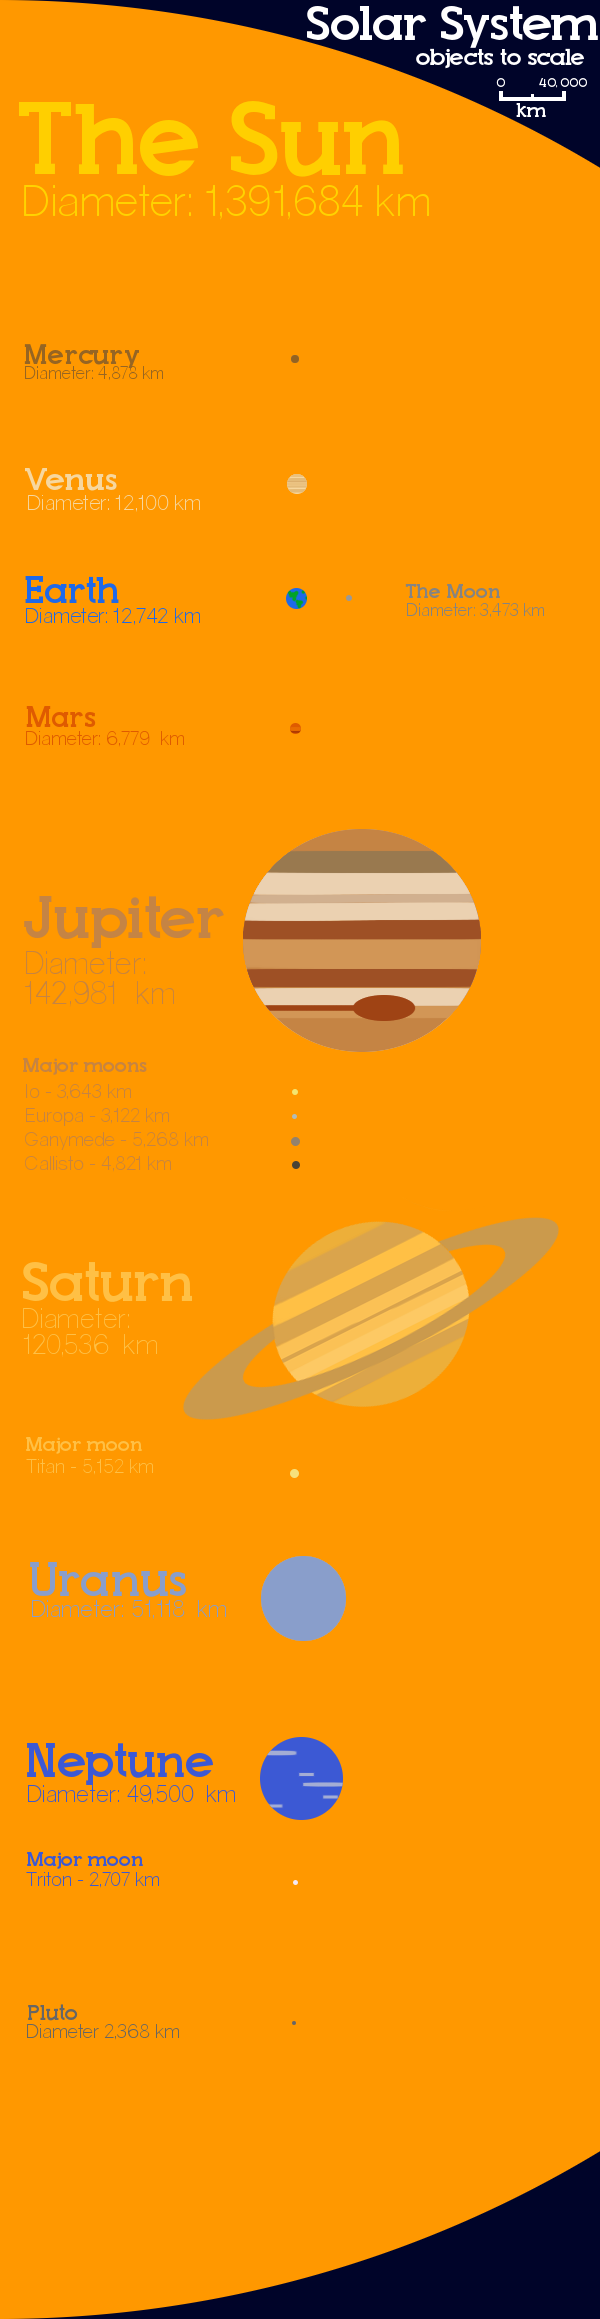 Solar system objects to scale